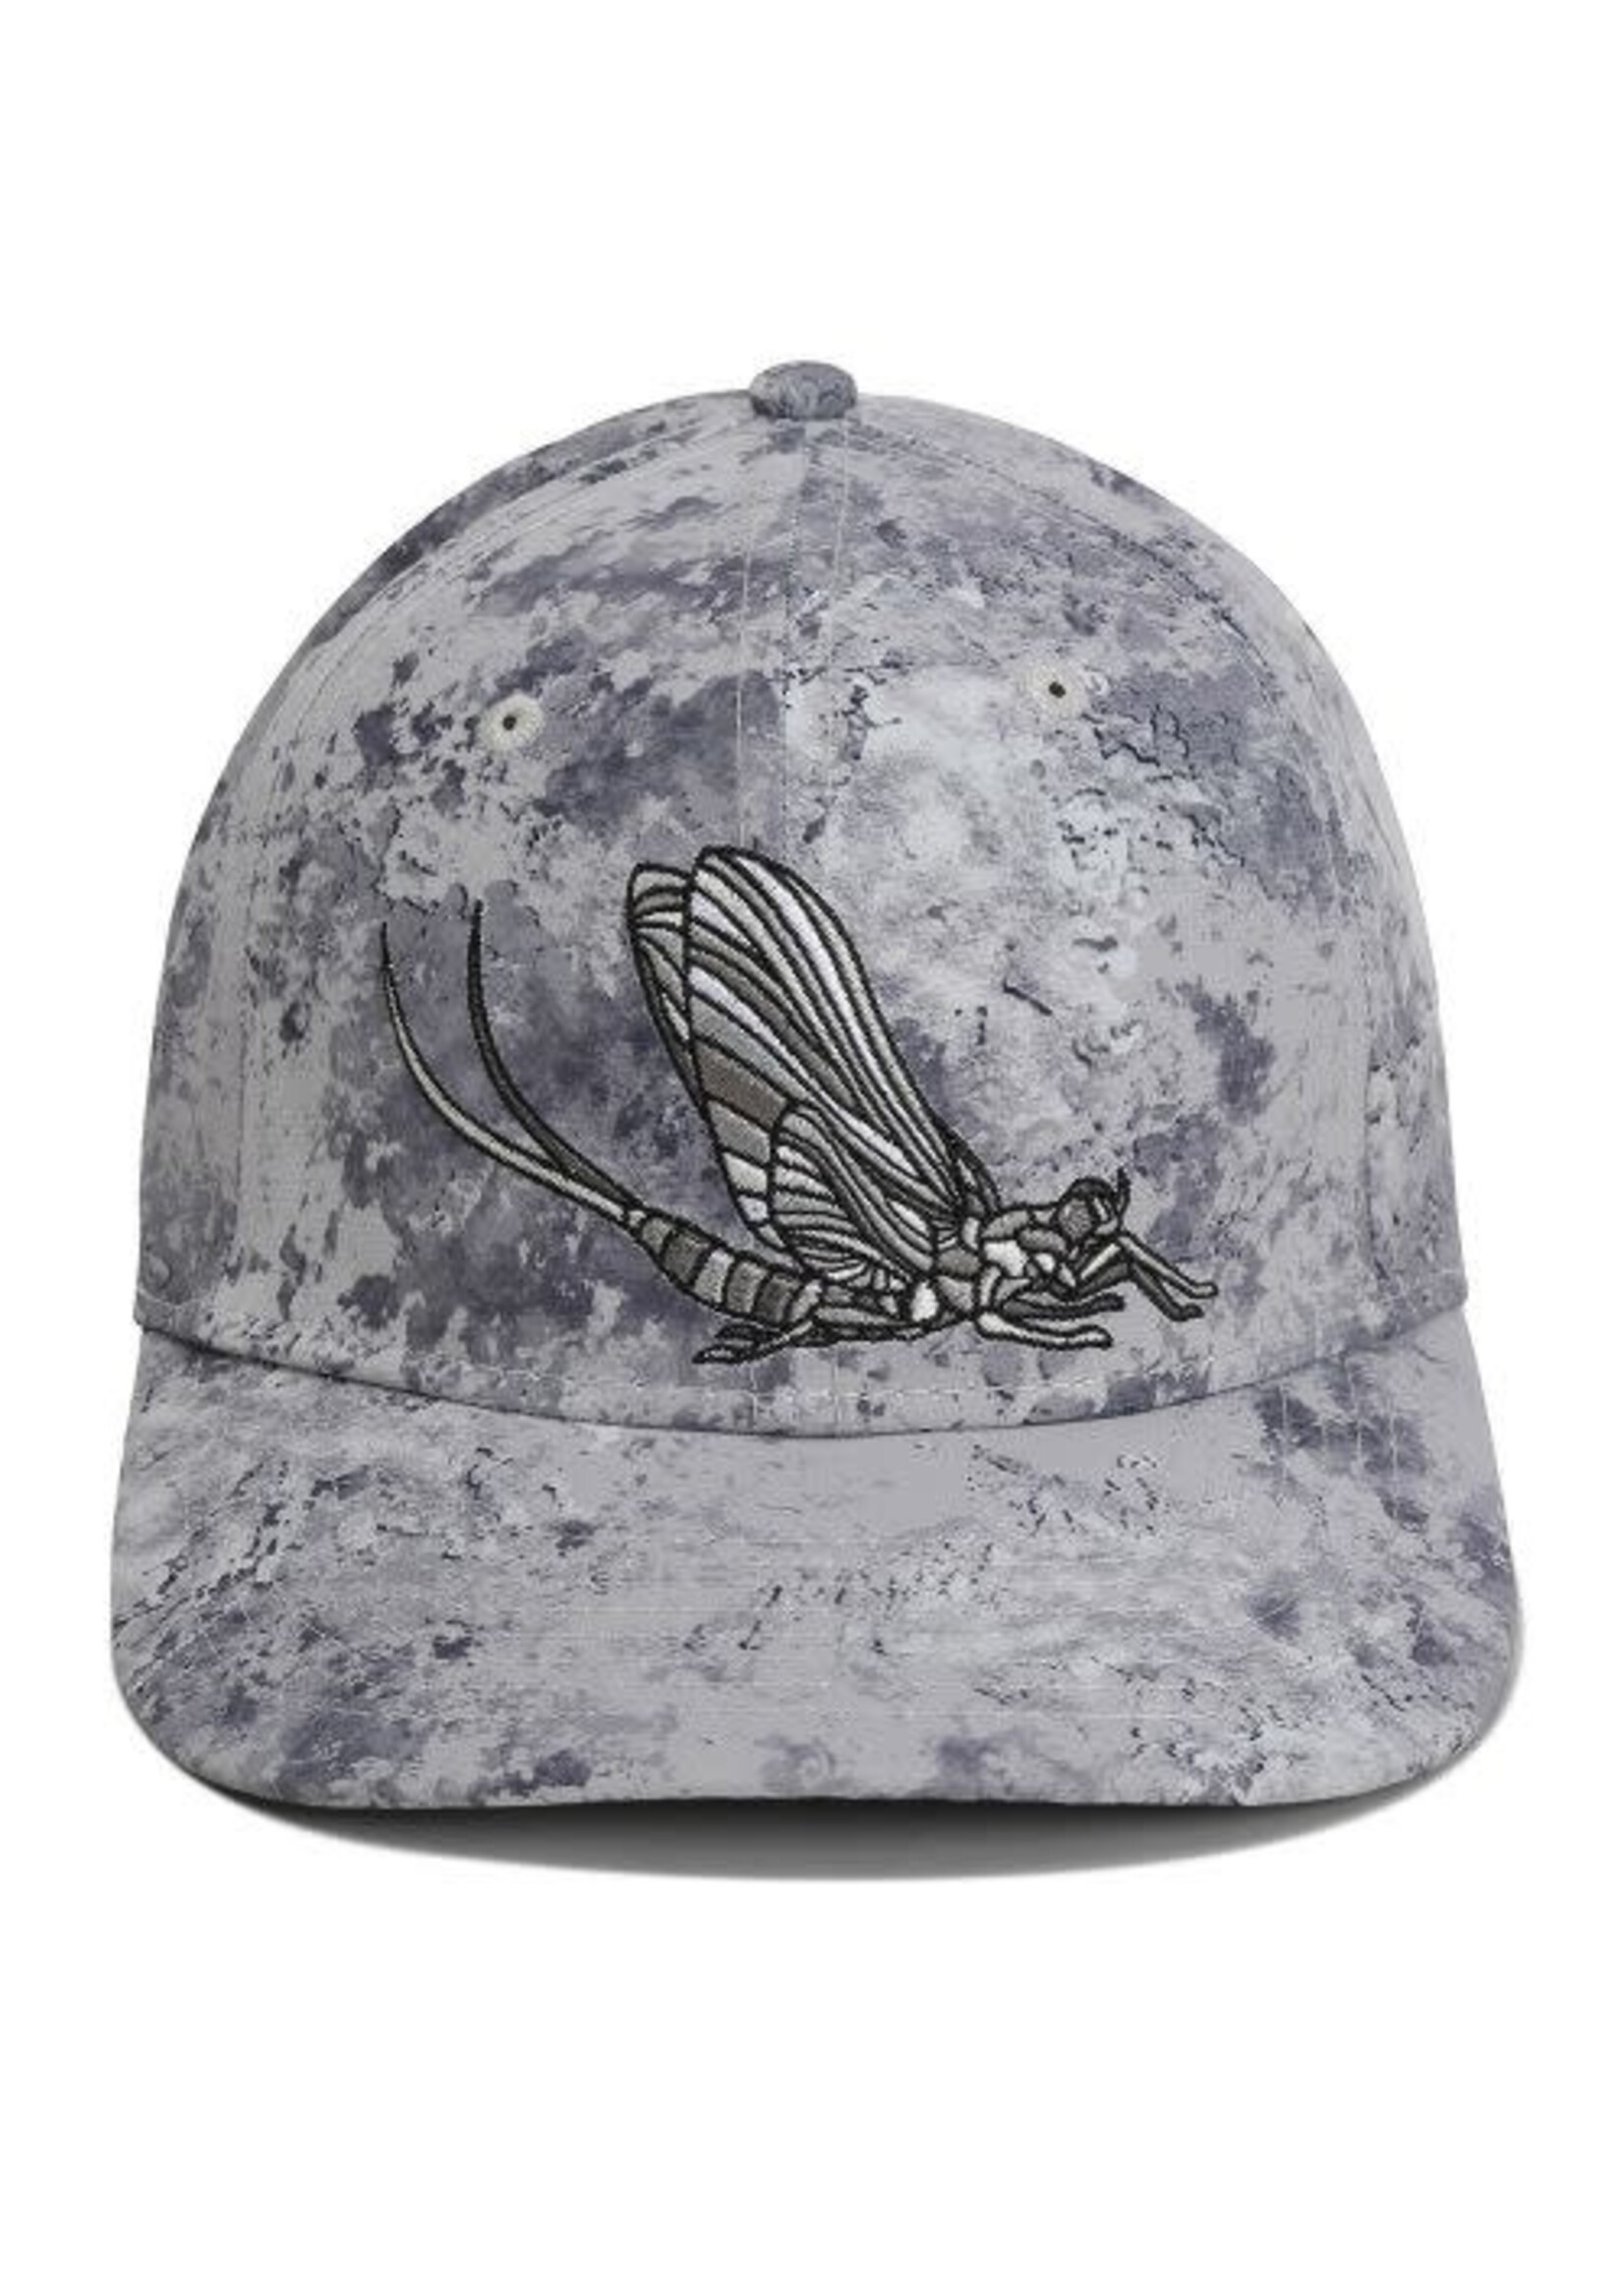 Paramount Mayfly Match the Hatch Fly Fishing 6-Panel Cap - Tackle Shack